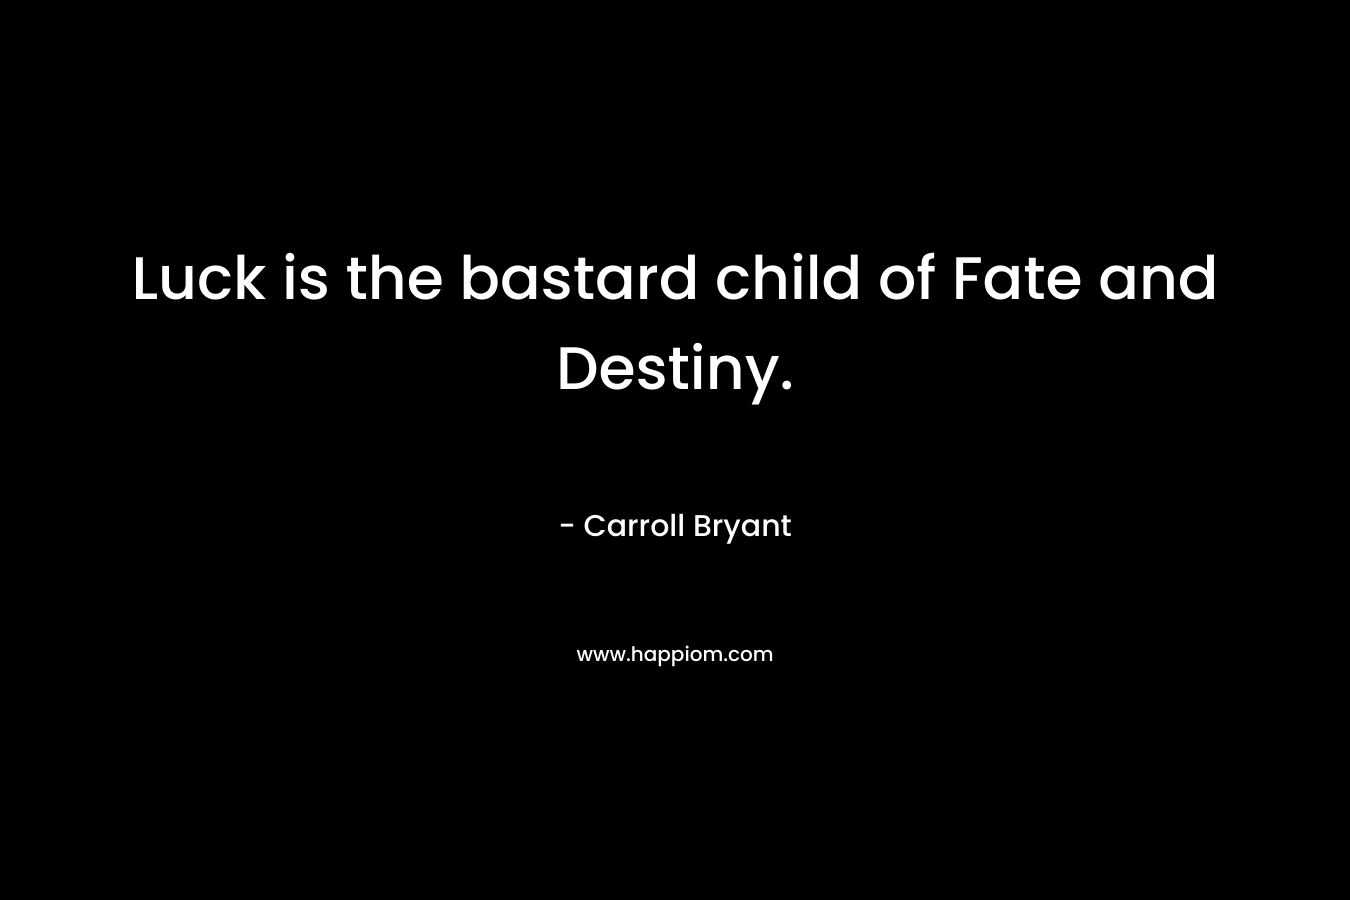 Luck is the bastard child of Fate and Destiny.